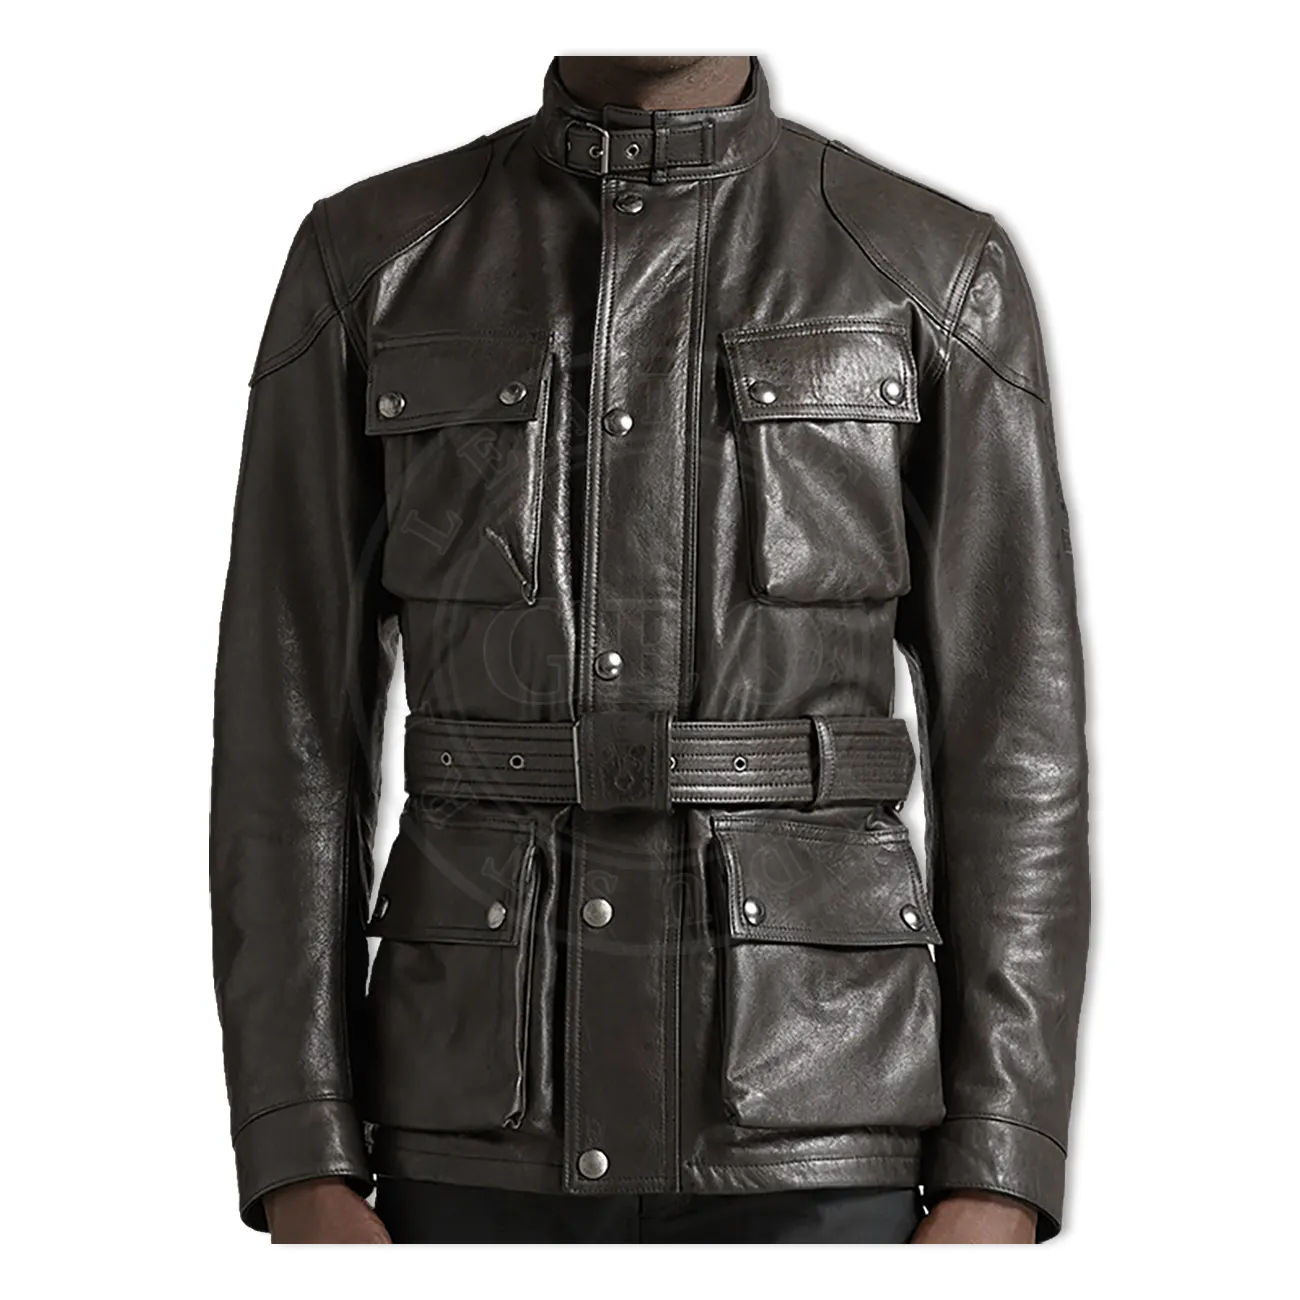 Motorcycle Leather Jackets For Gents / GEO Motorbike Jackets